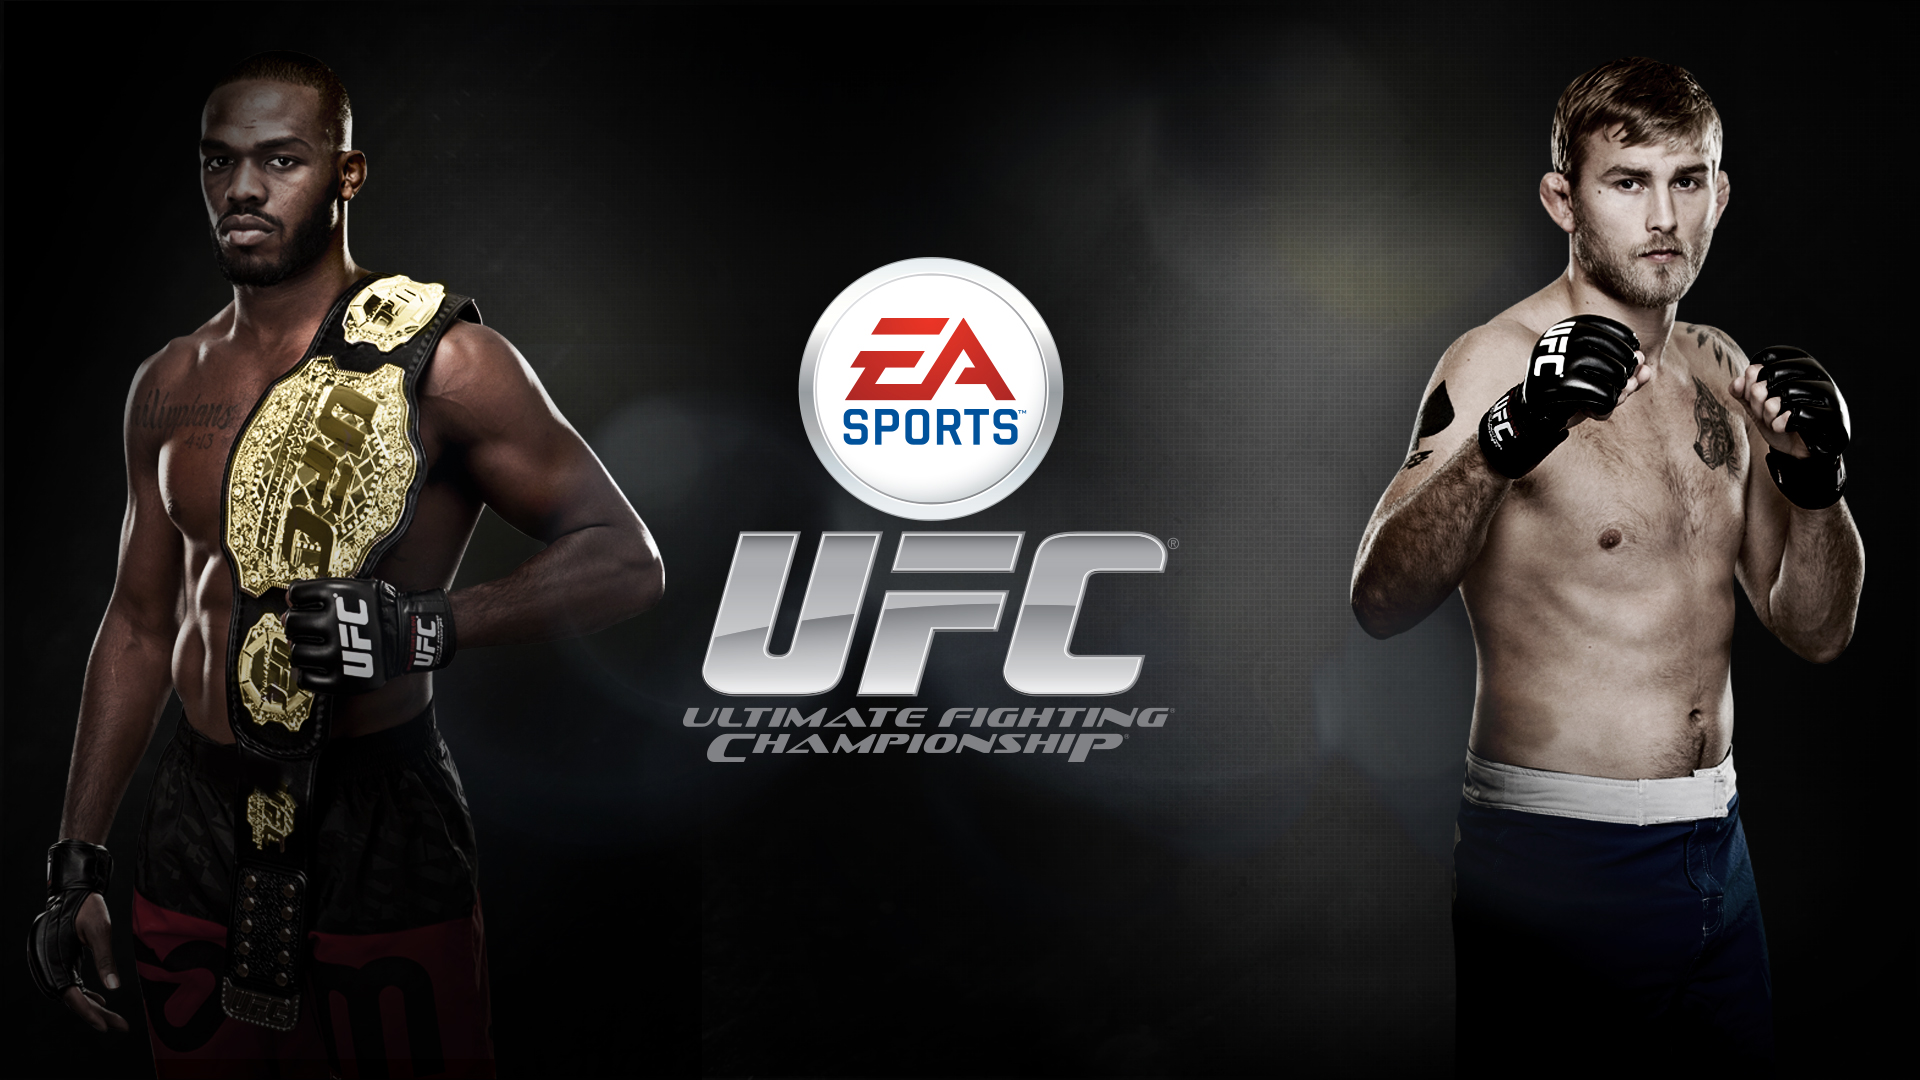 ea sports ufc 4 rated m